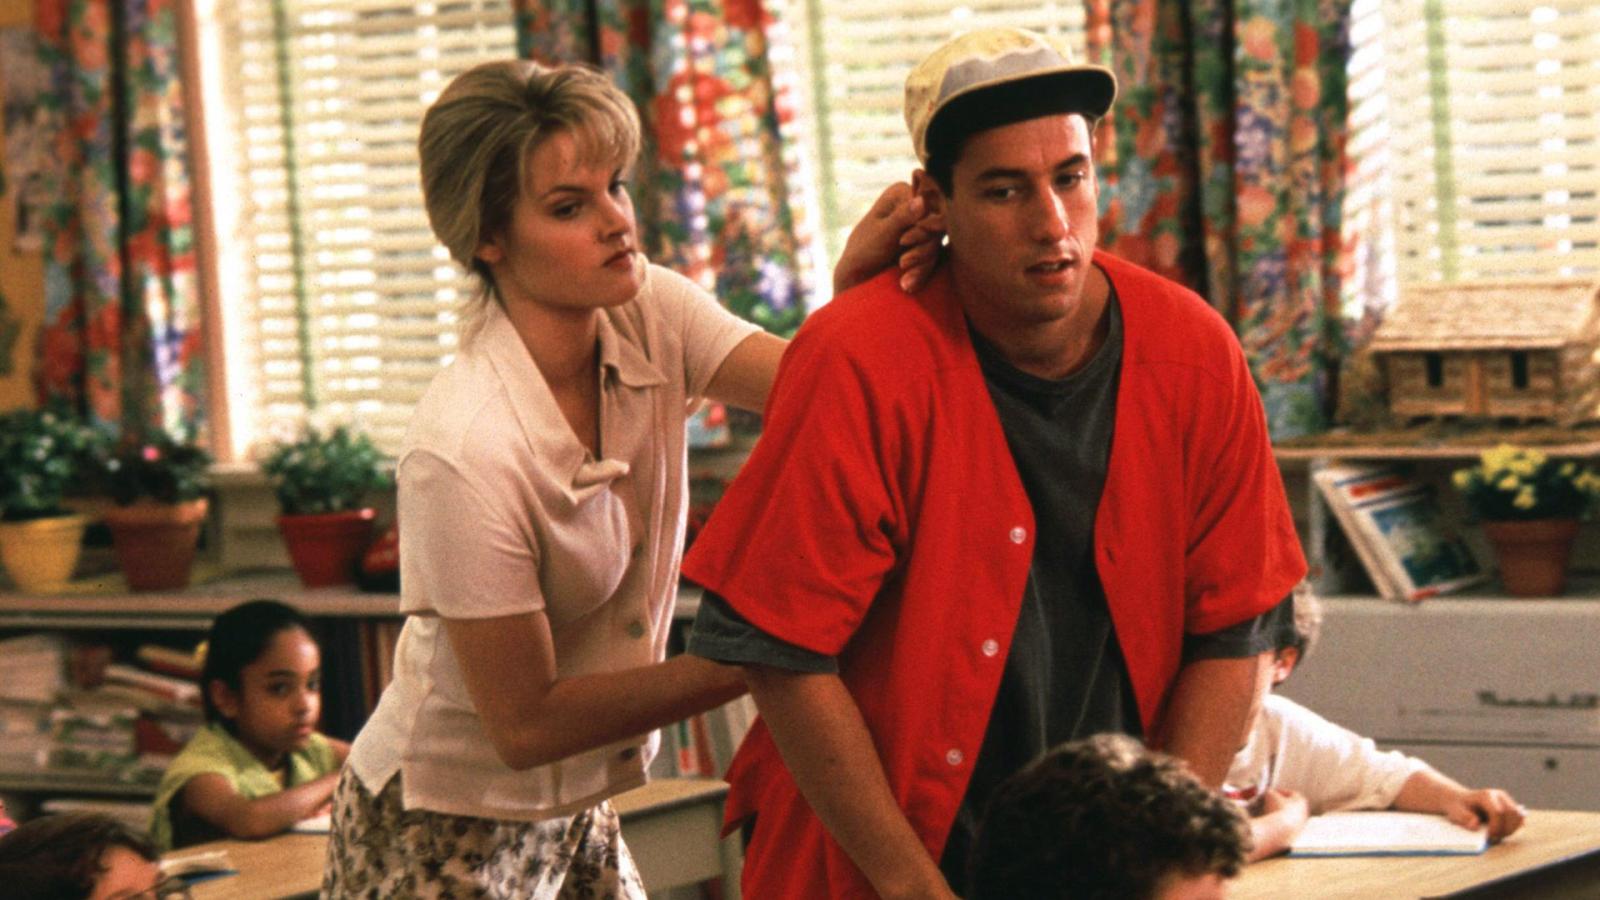 15 Best Movies With Adam Sandler to Watch With Family - image 13